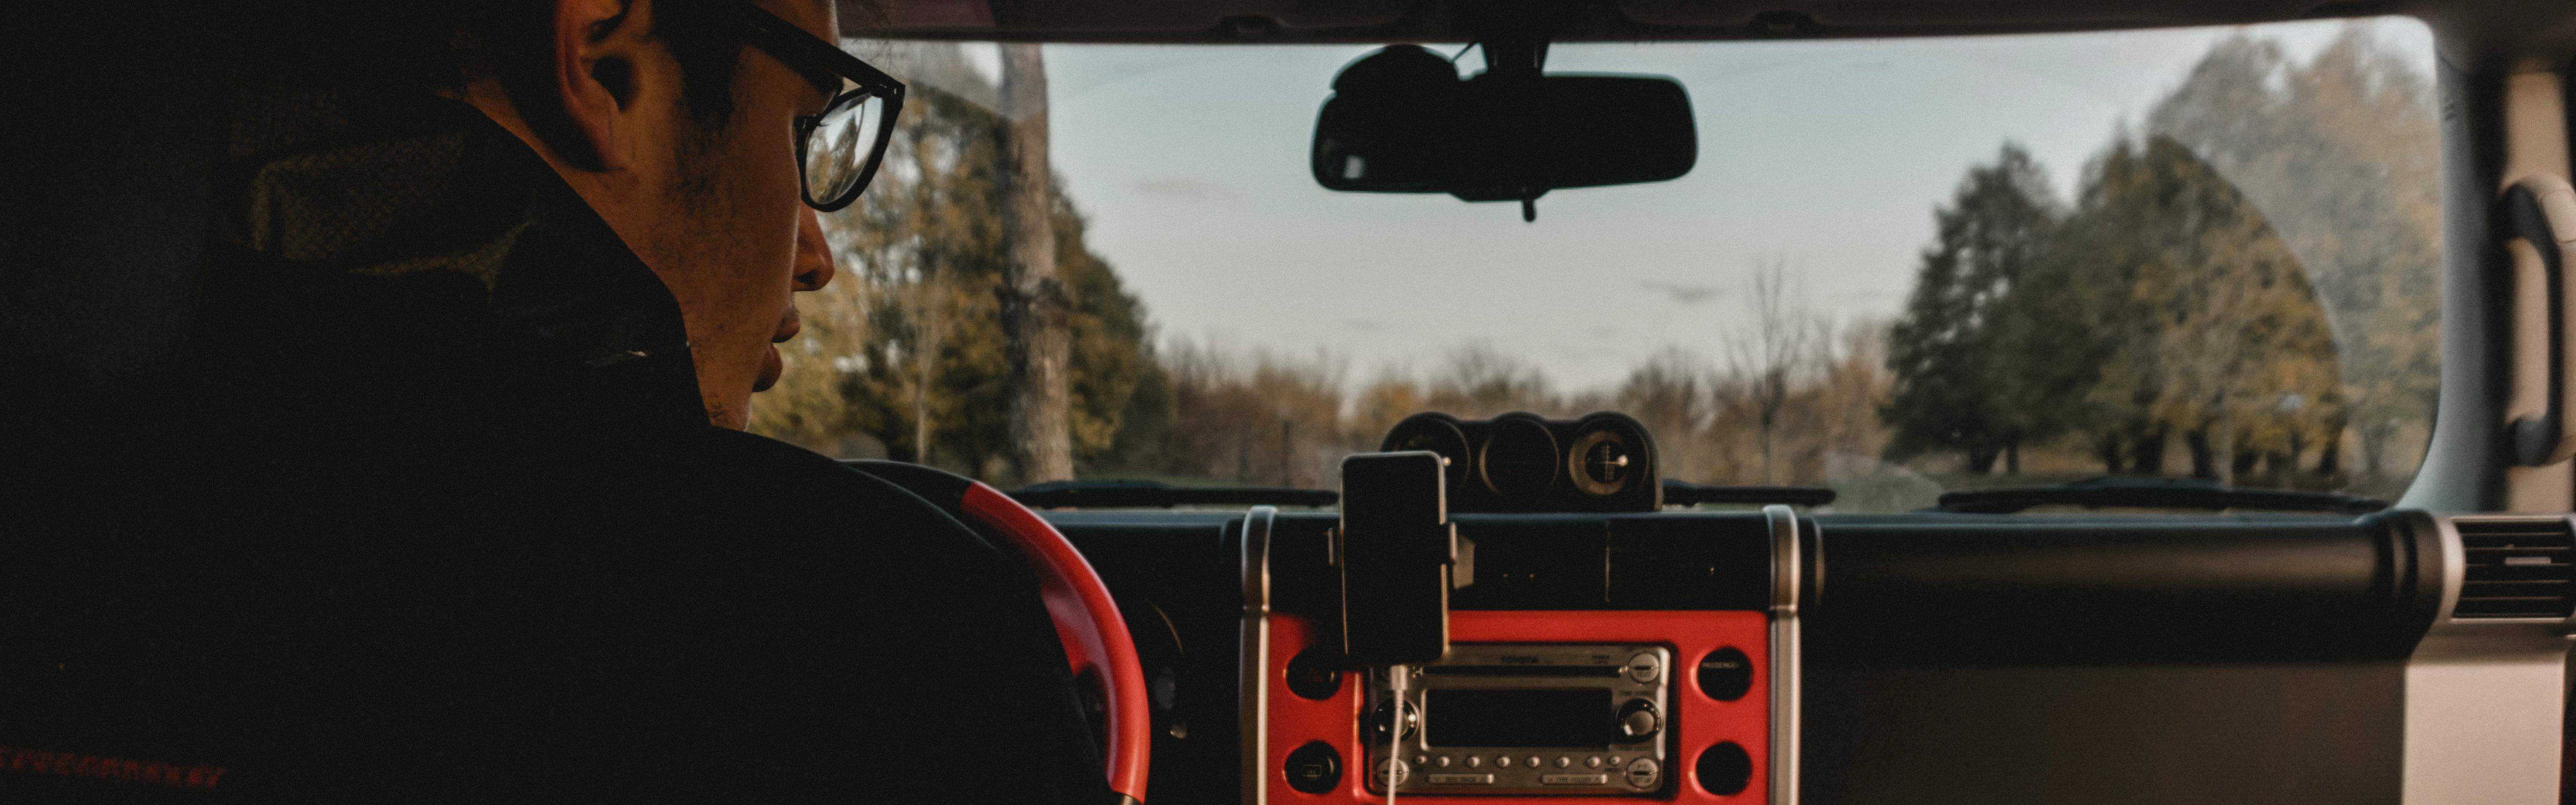 Man listens to something on the car radio as he is driving through a forest area. The radio is red and trees can be seen outside the window.